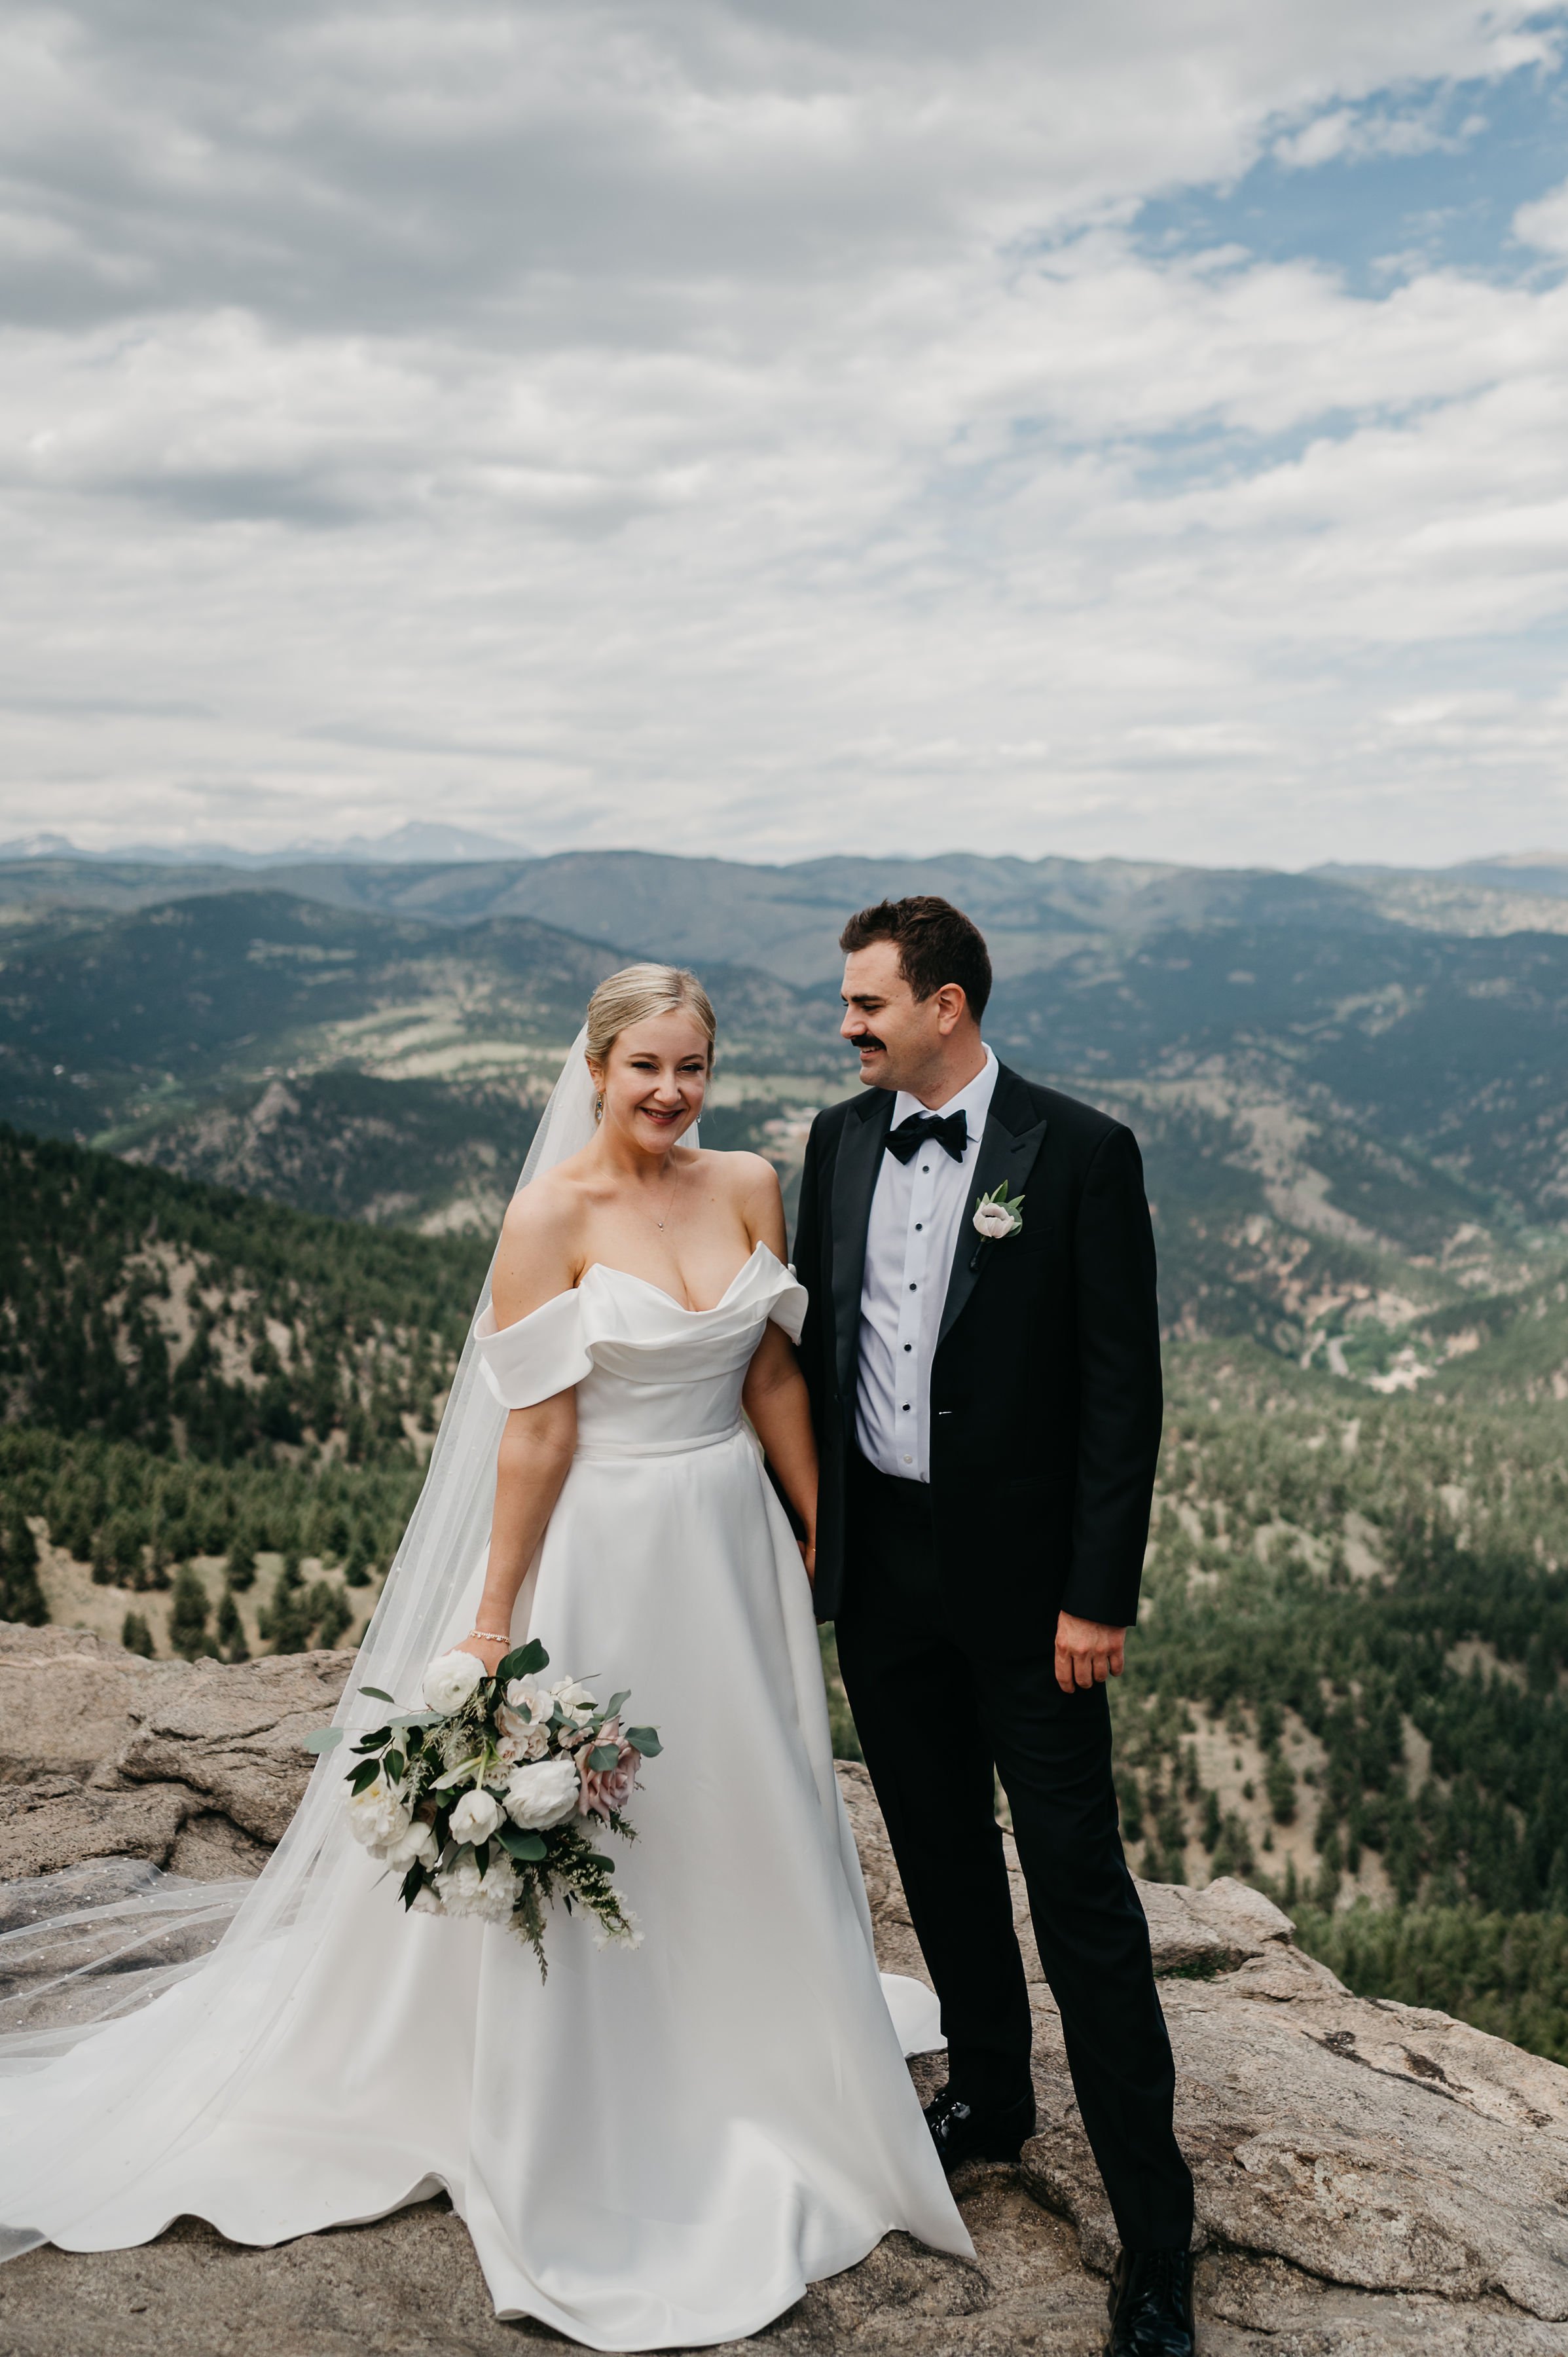 a classic satin ballgown with cowl neckline by hera couture in this real mountain top wedding